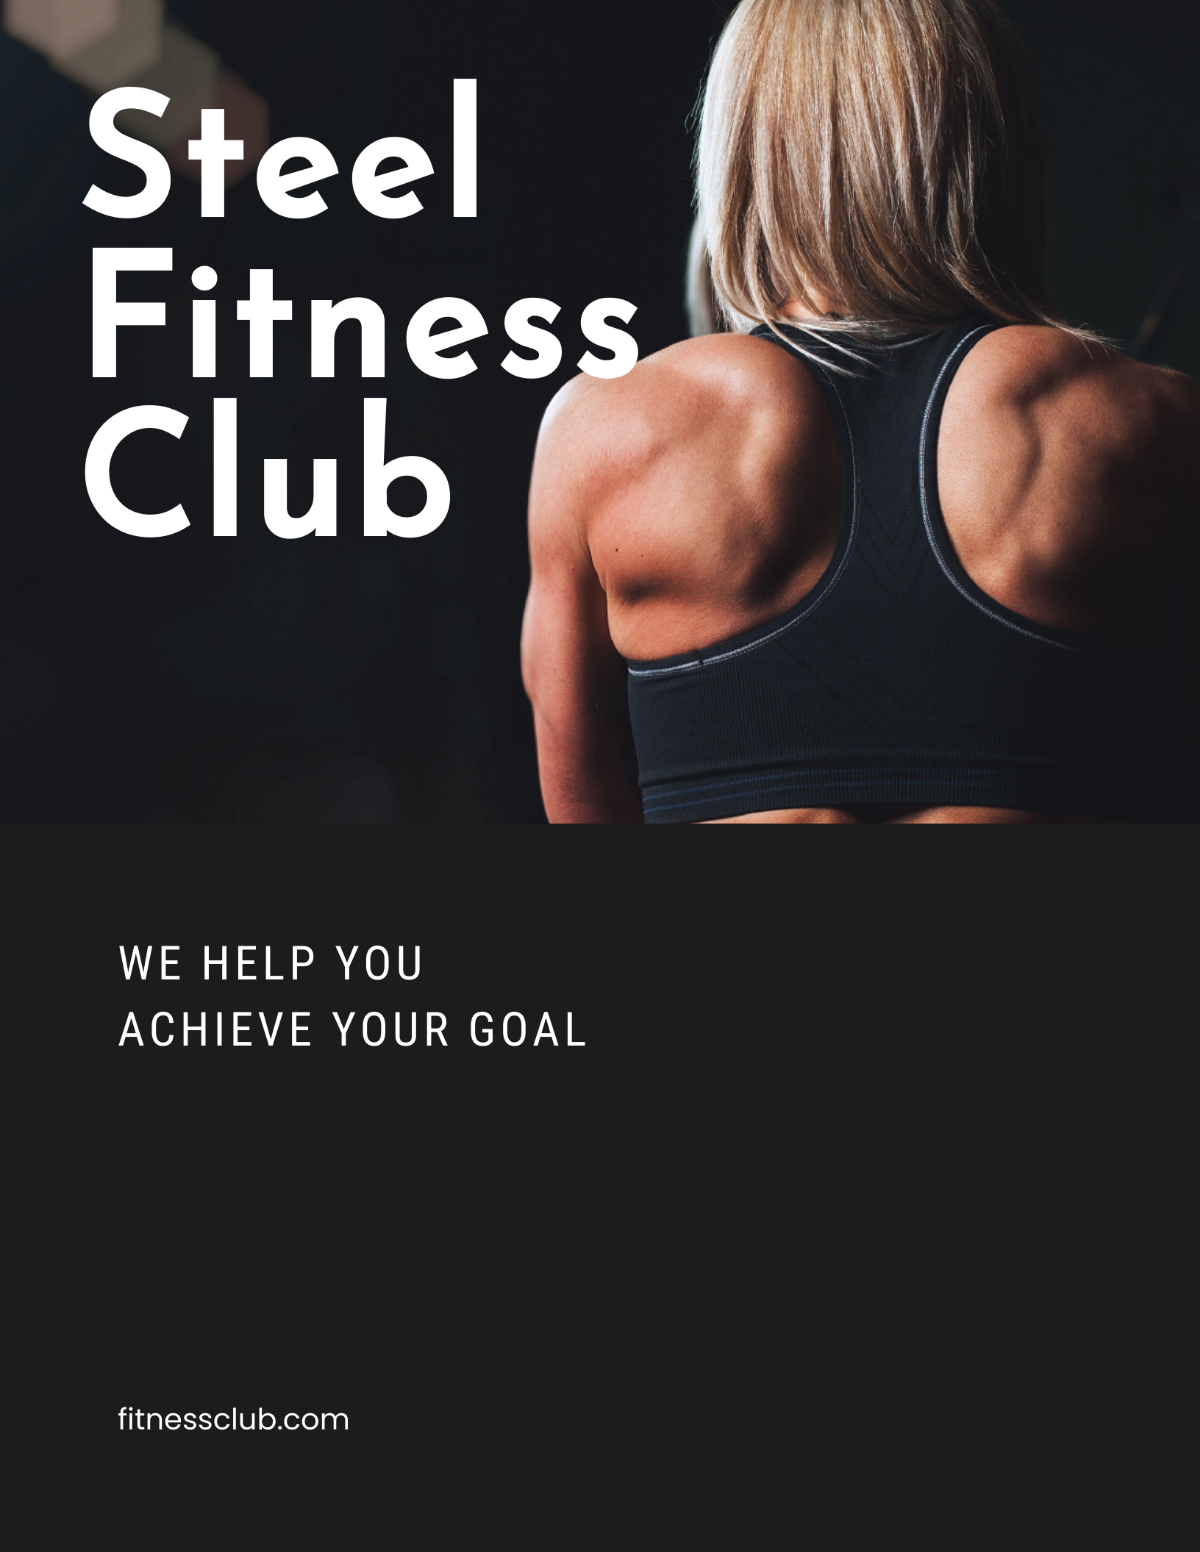 Fitness Club Flyer Template